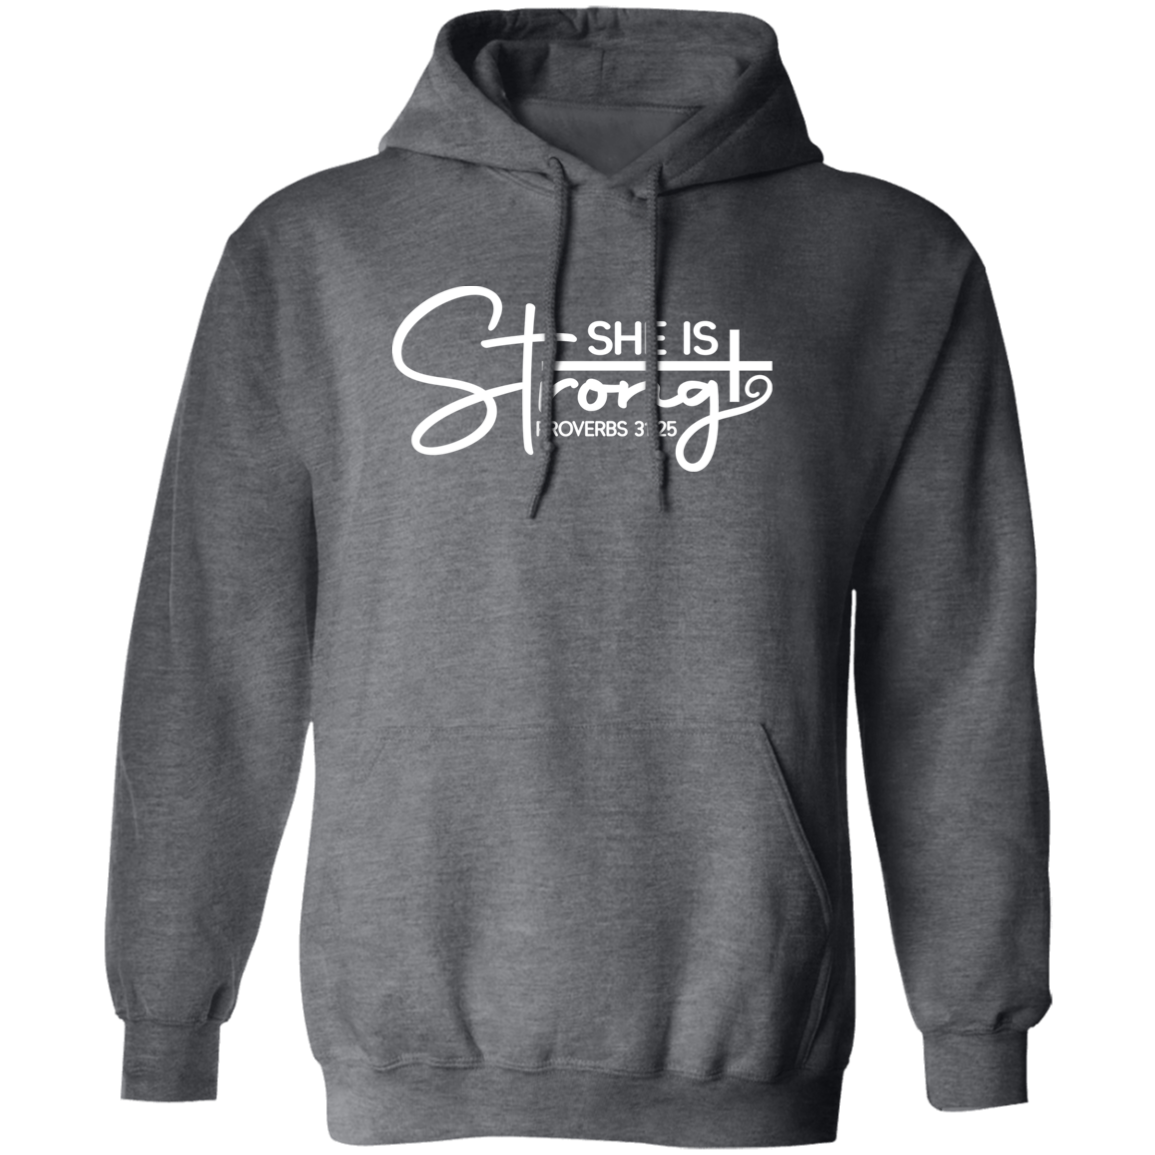 She Is Strong Pullover Hoodie